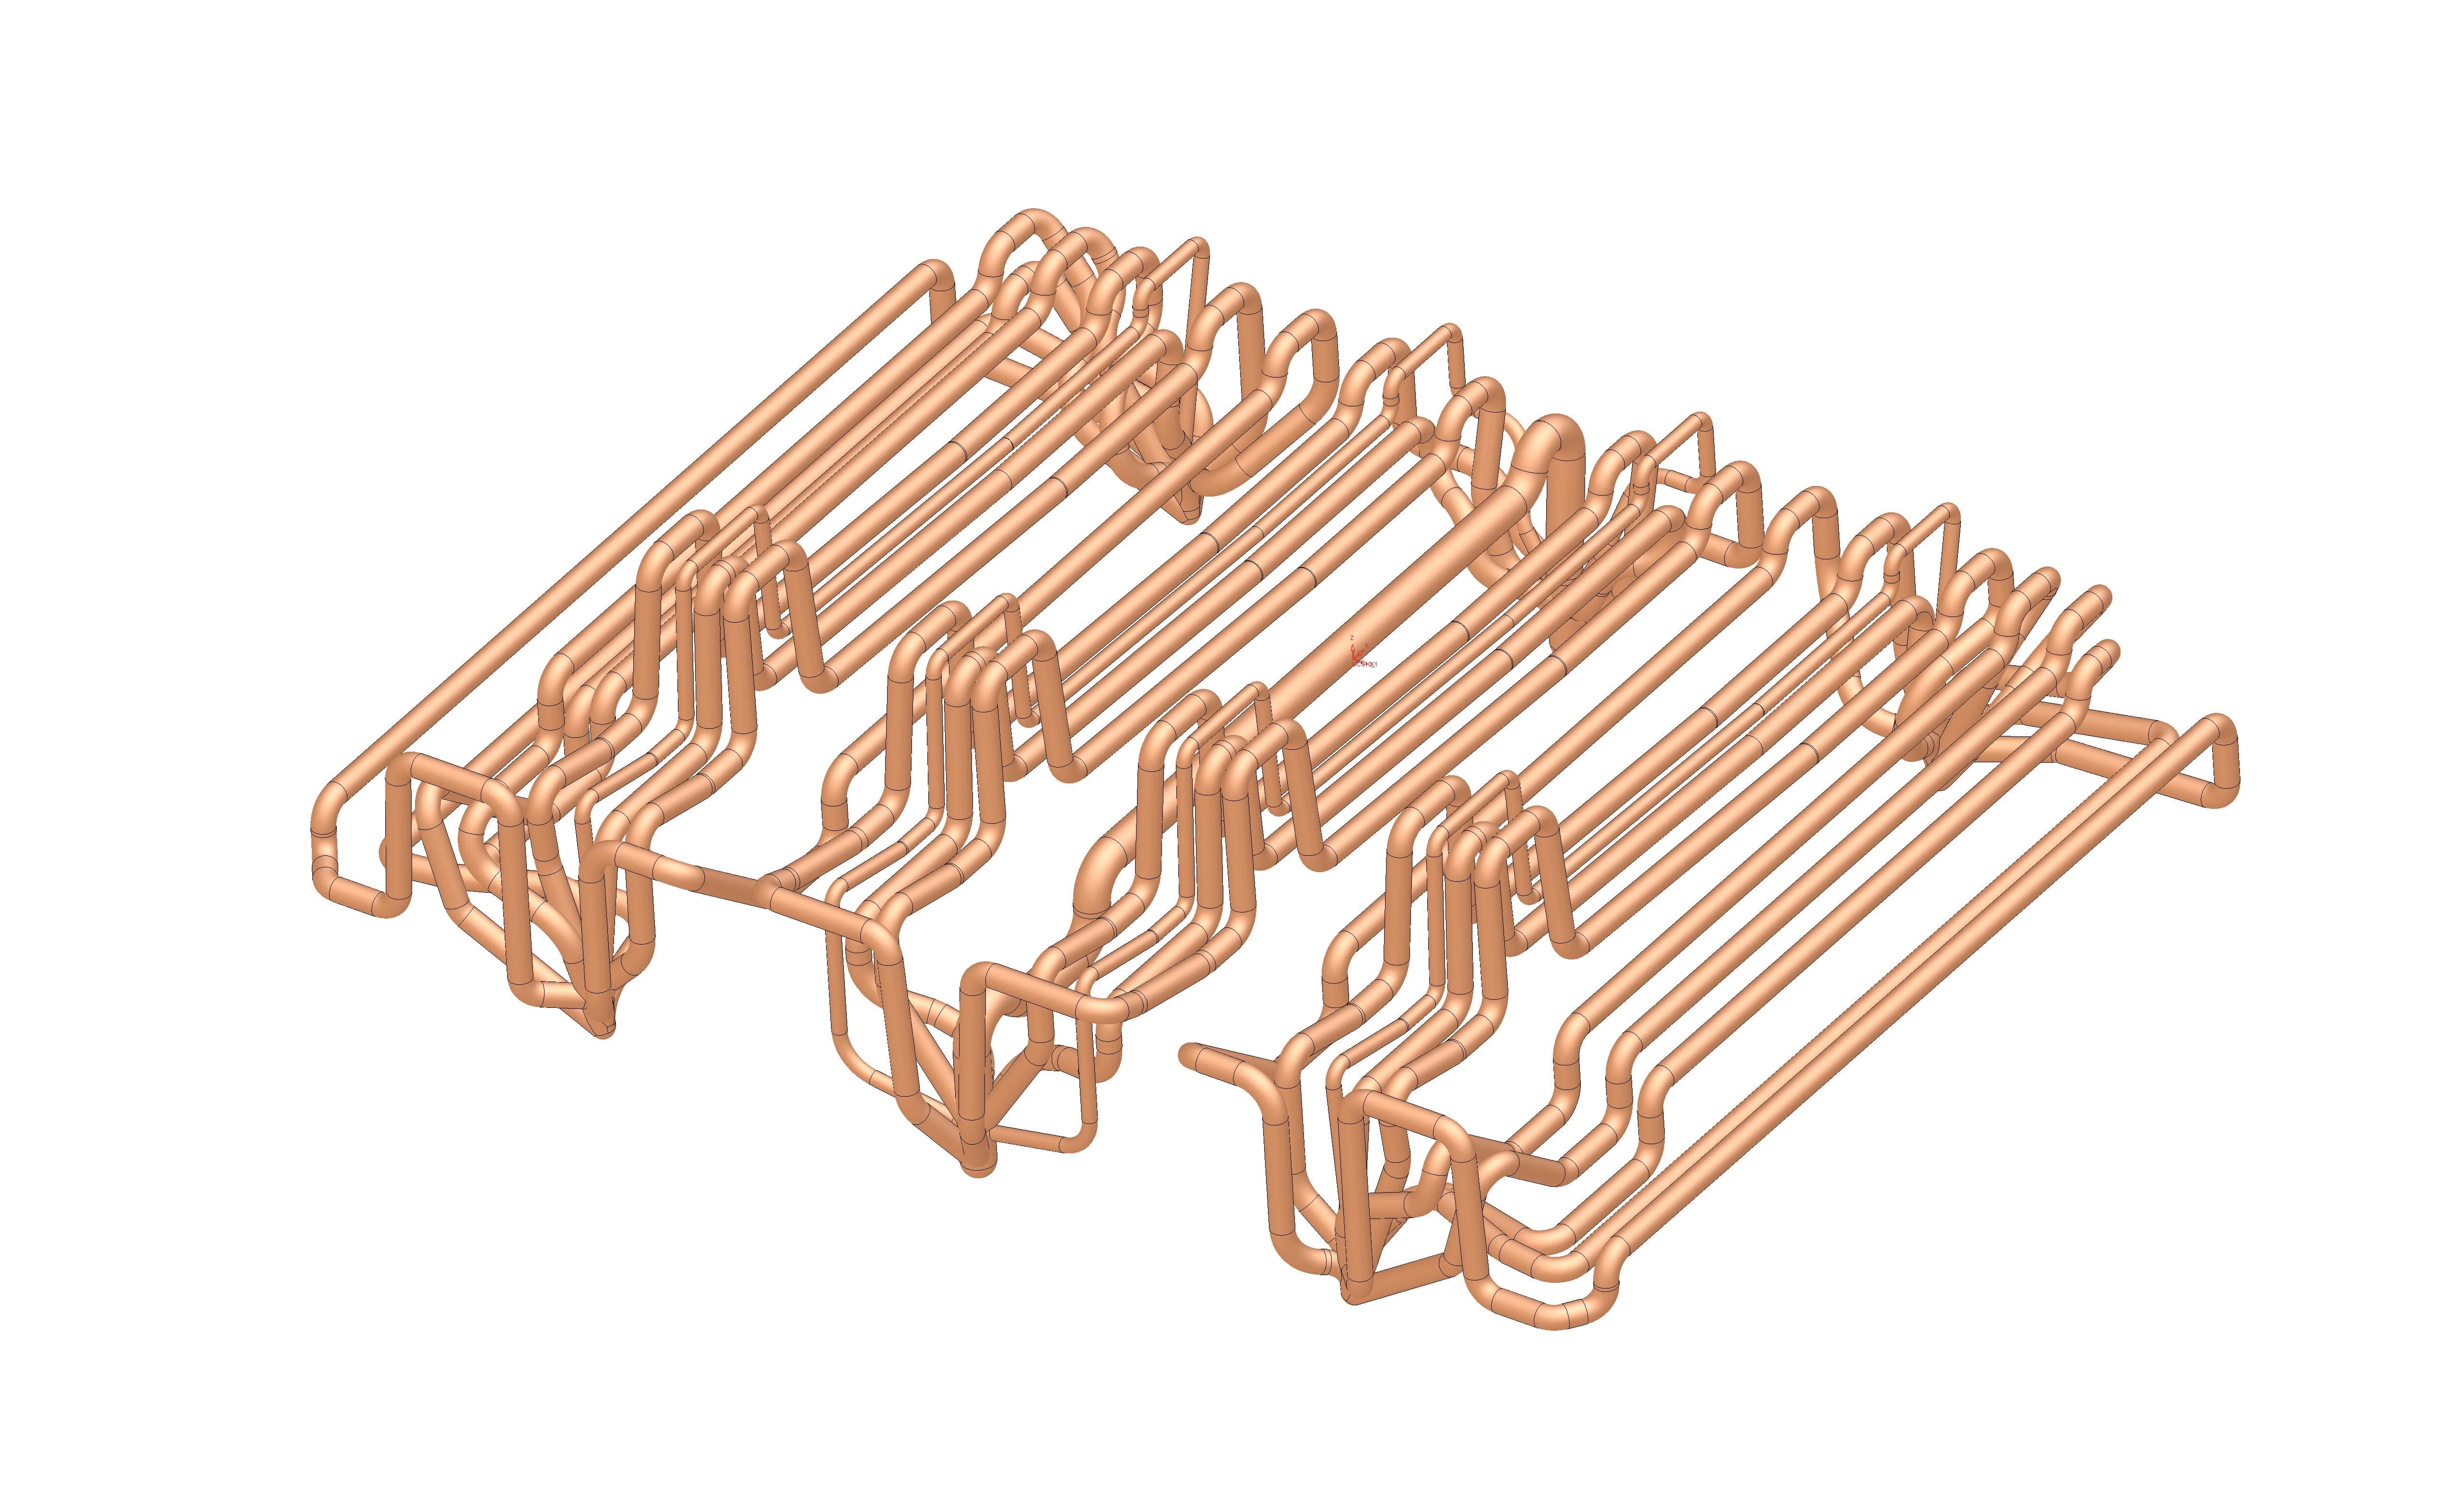 Conformal cooling channels, designed and produced by BSF Bünter AG